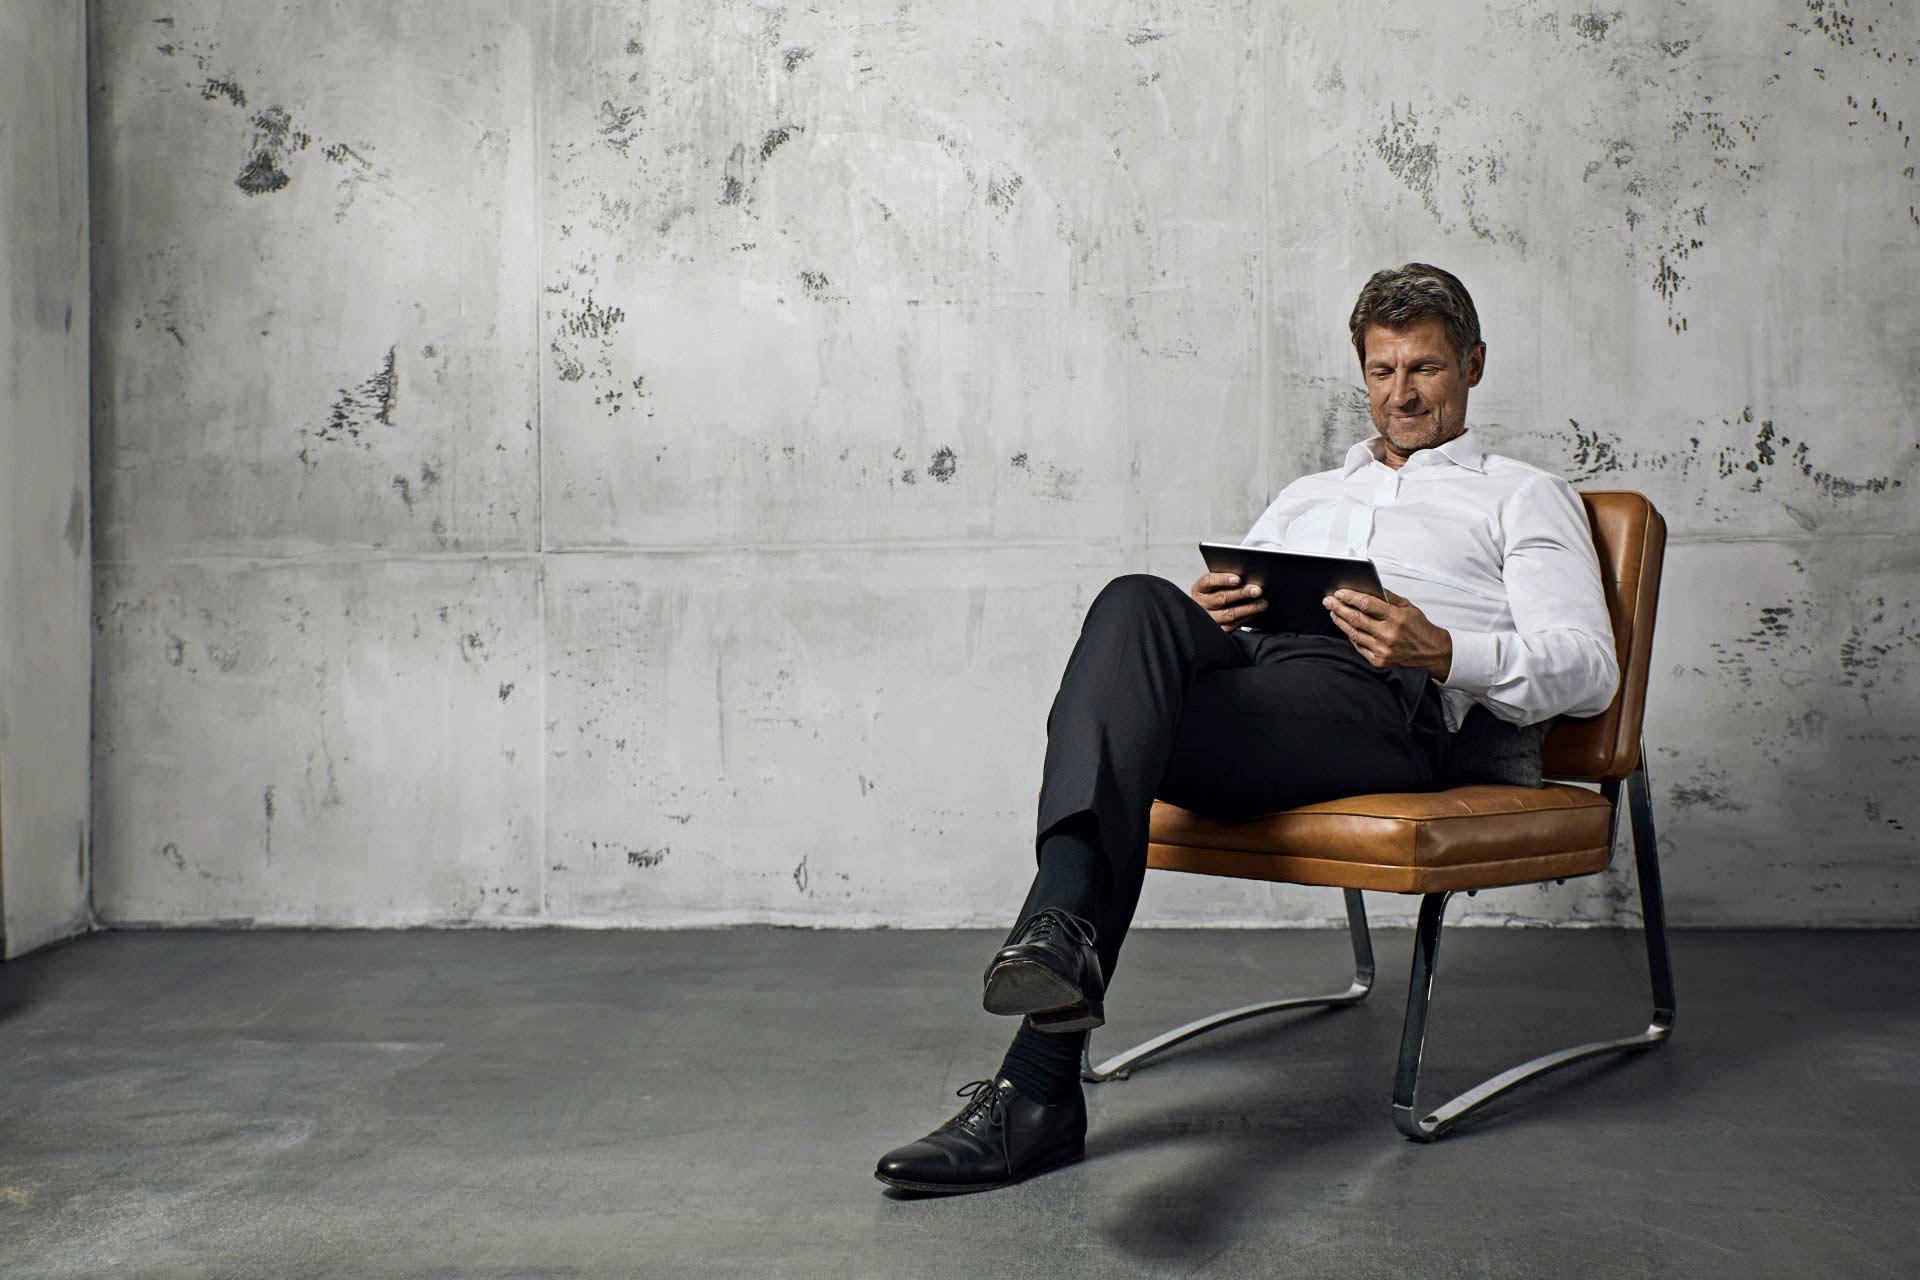 A man sits on a leather chair and looks at his tablet